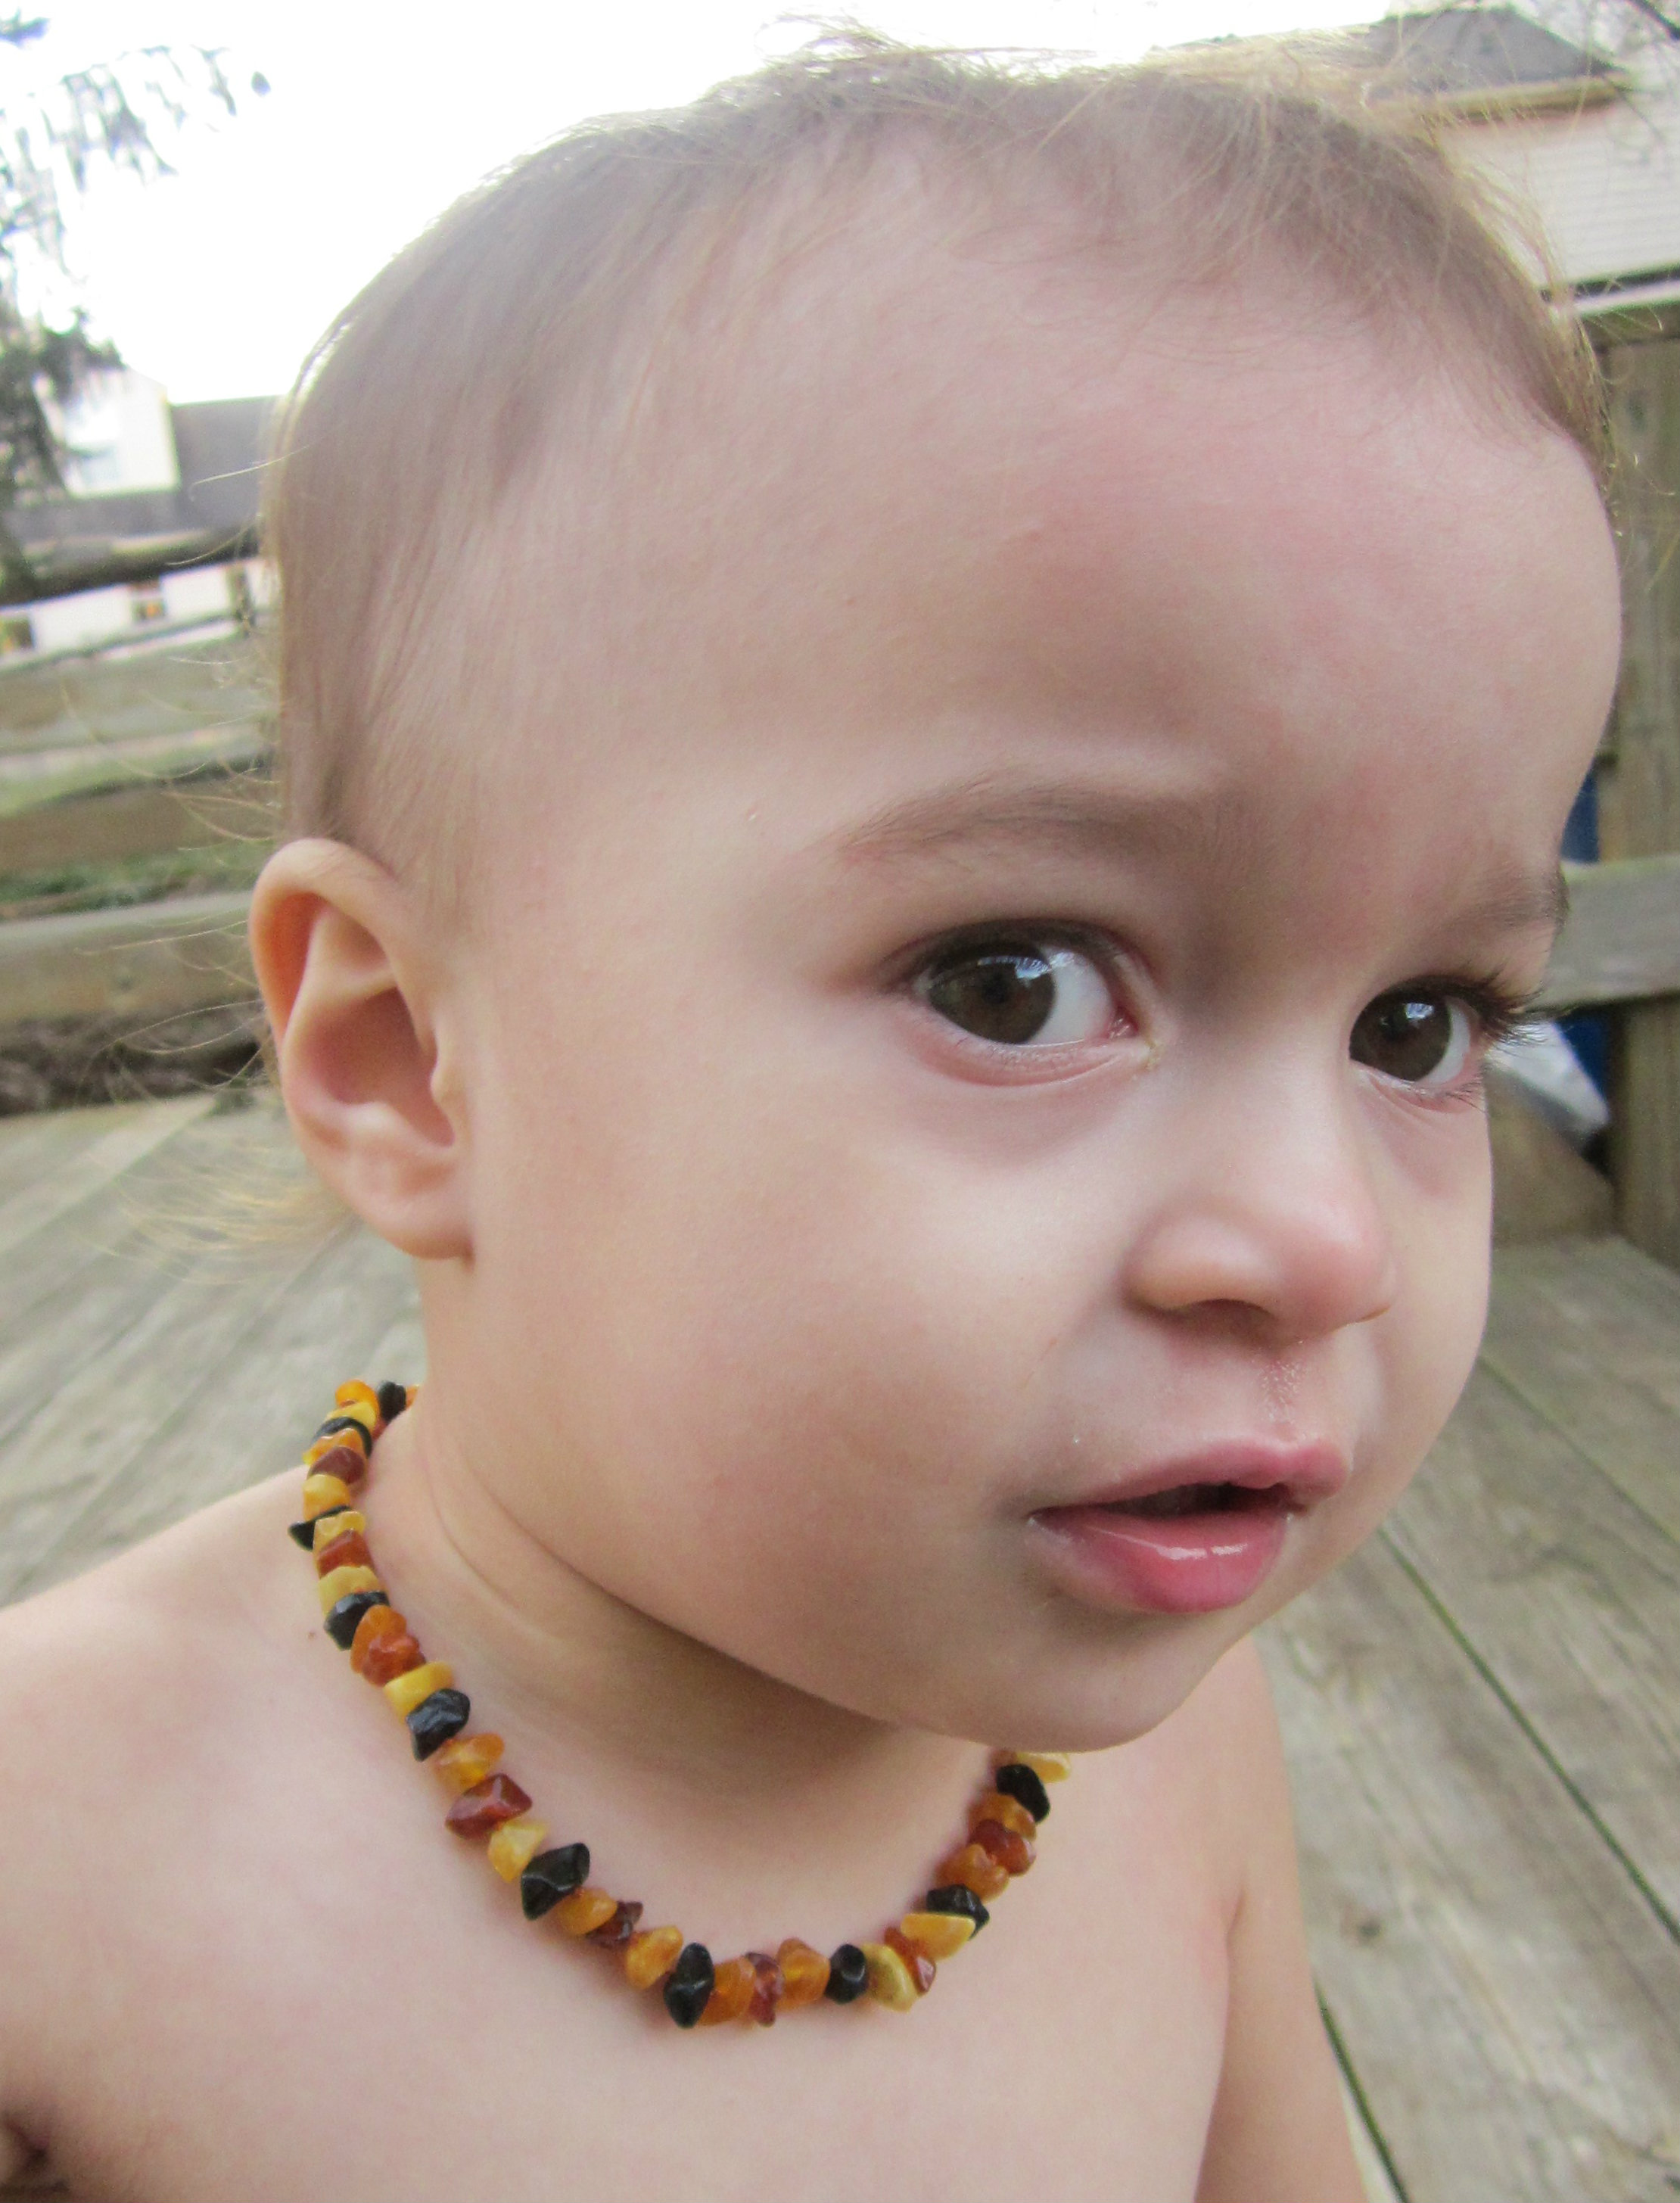 amber teething necklace info